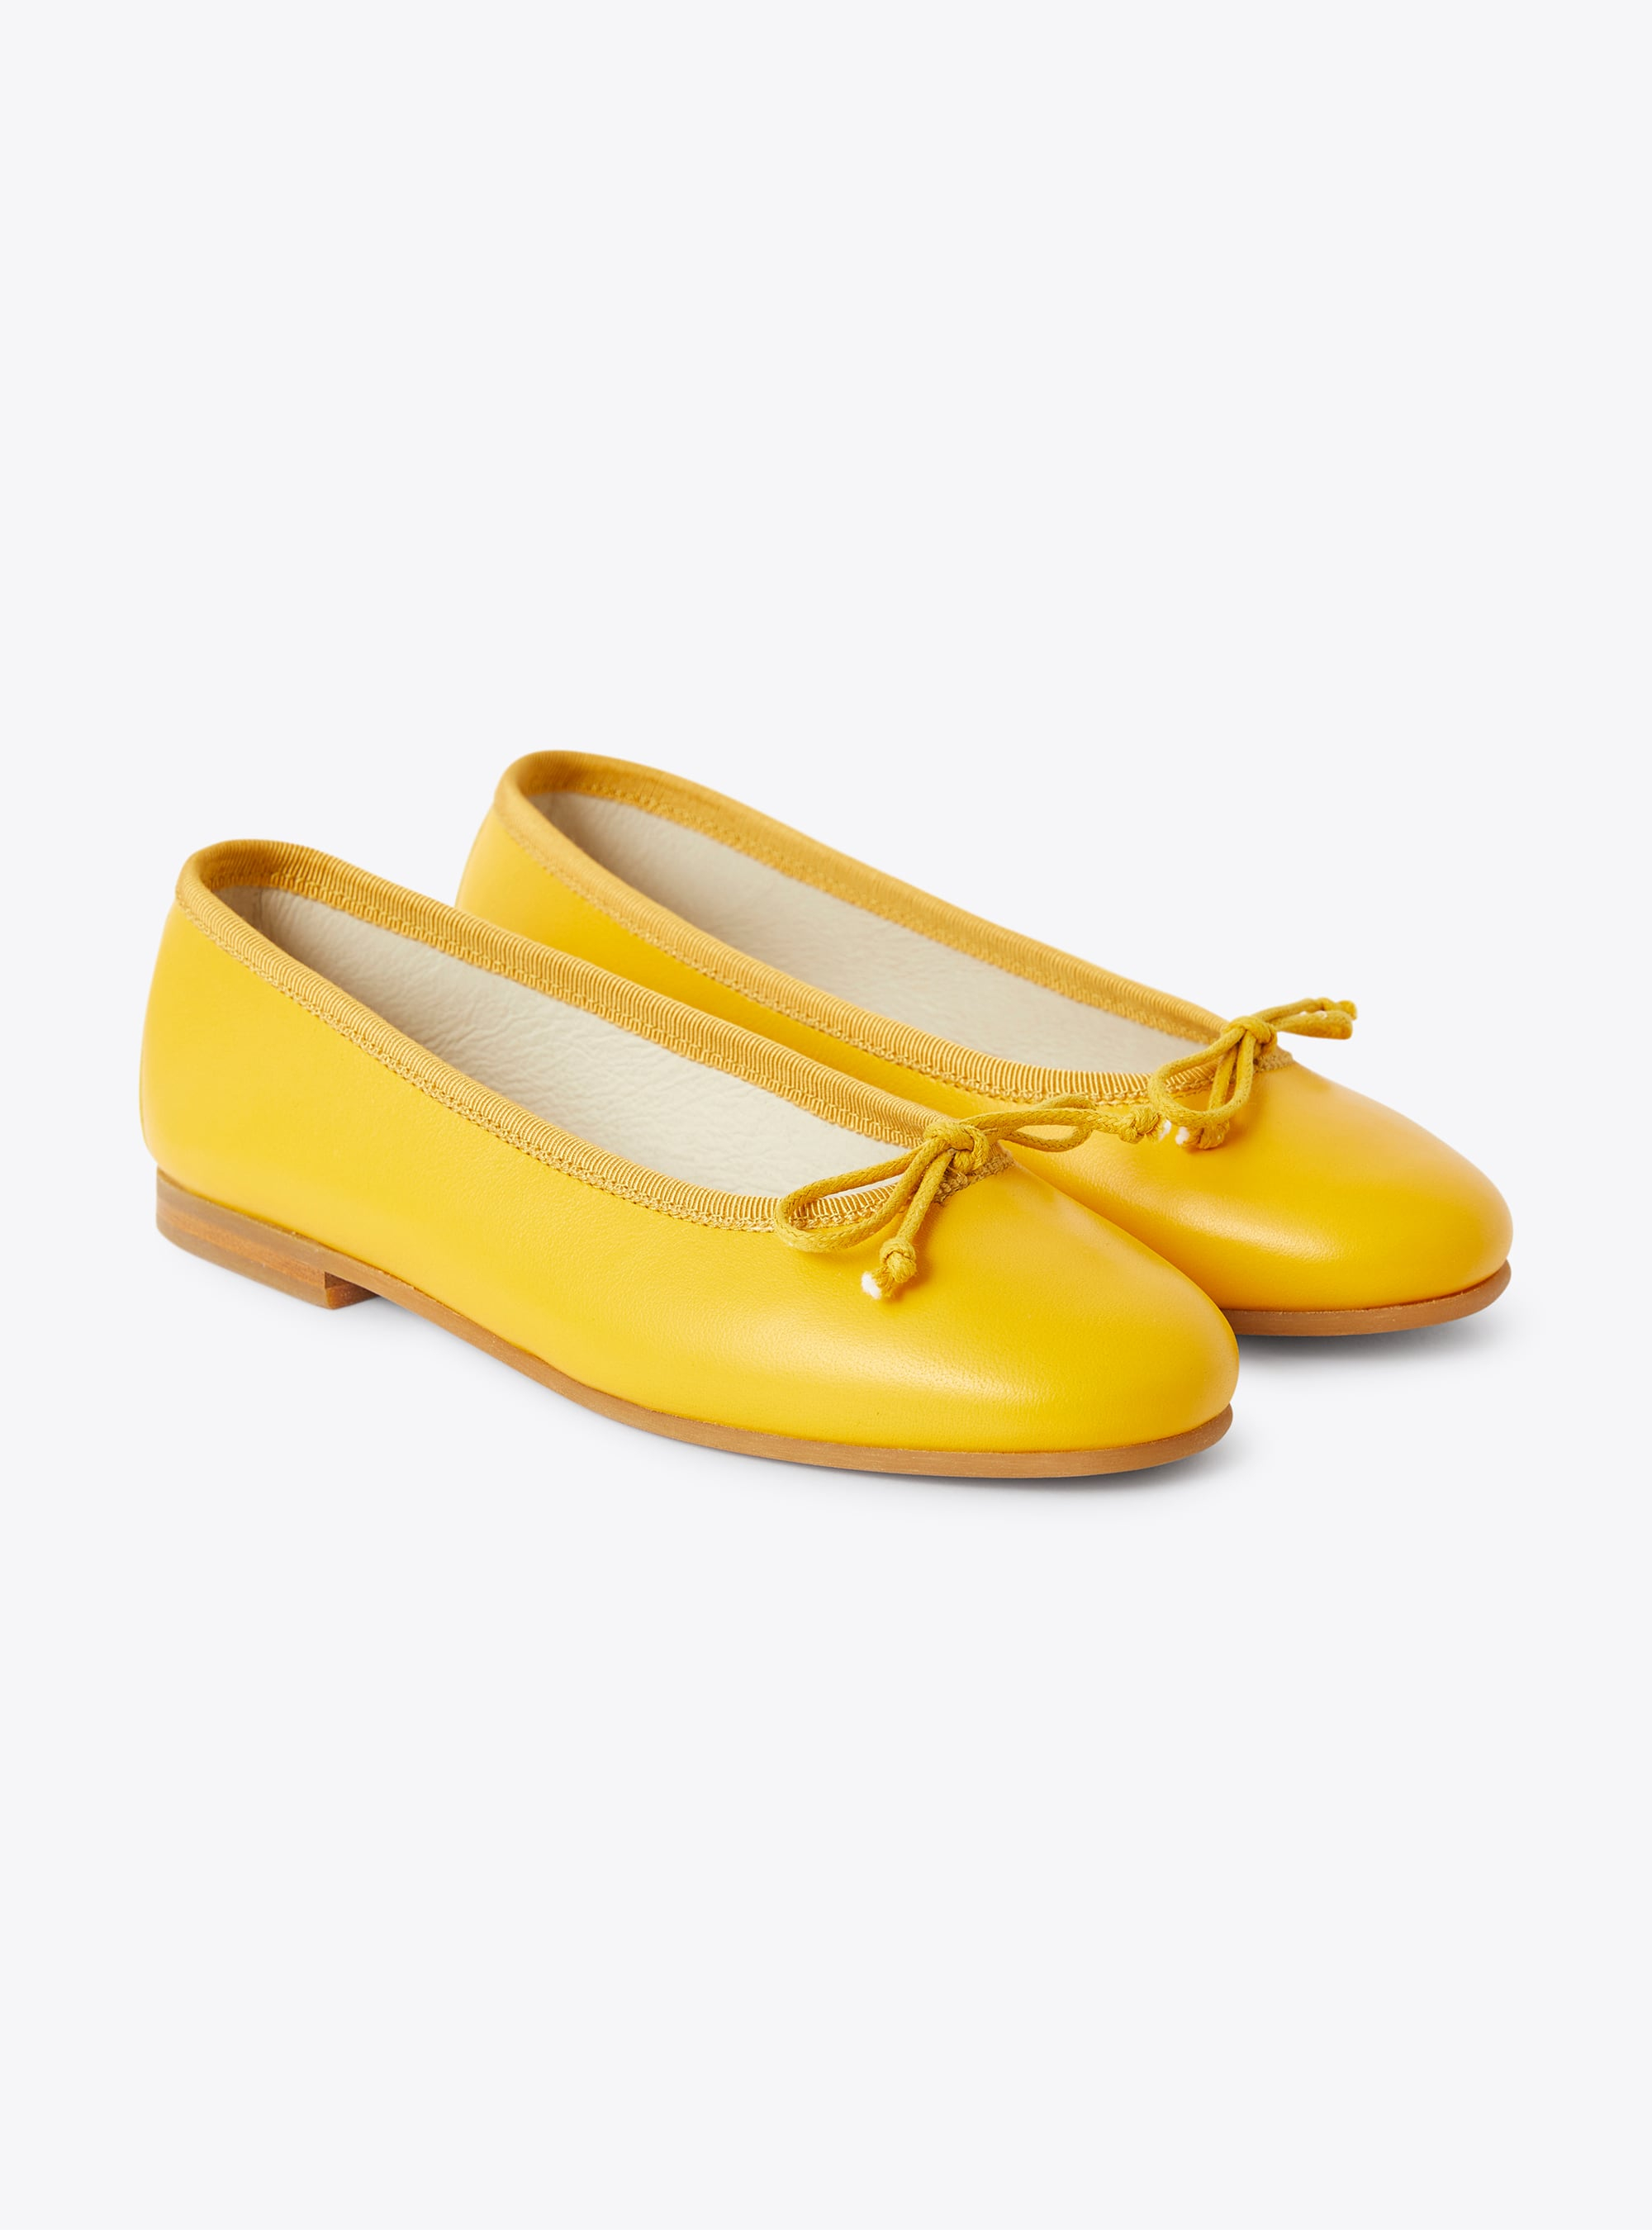 Ballet flat in plain sunshine-yellow leather - Shoes - Il Gufo